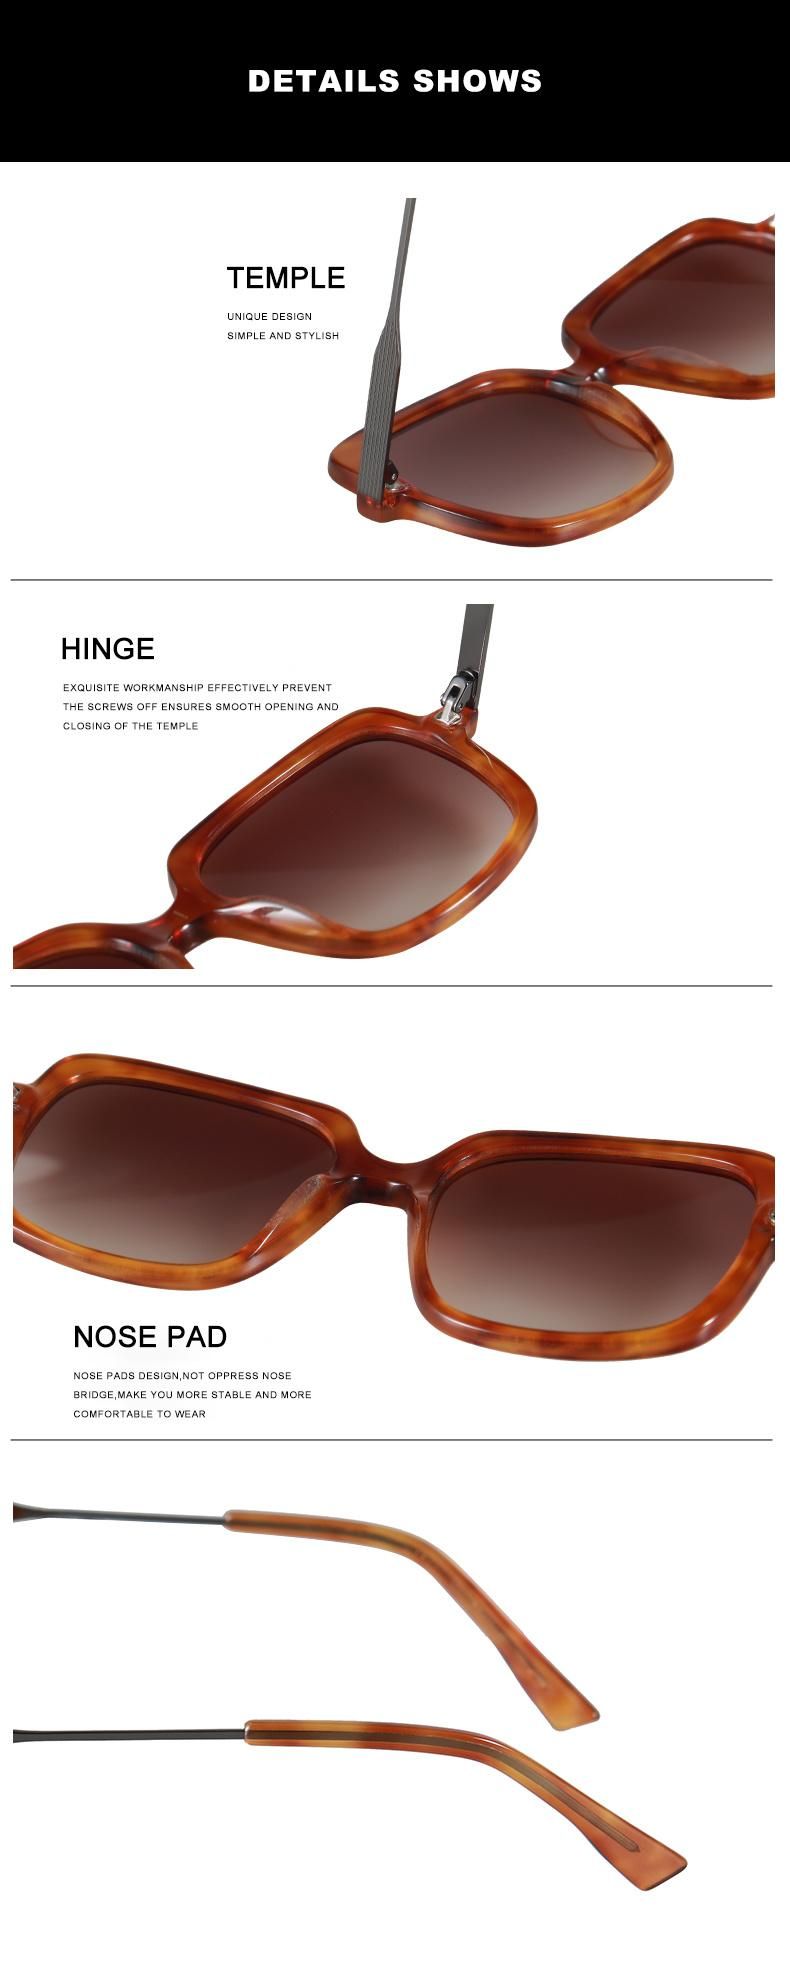 High Quality Hand-Make with Eco Friendly Acetate Sunglasses for Lady